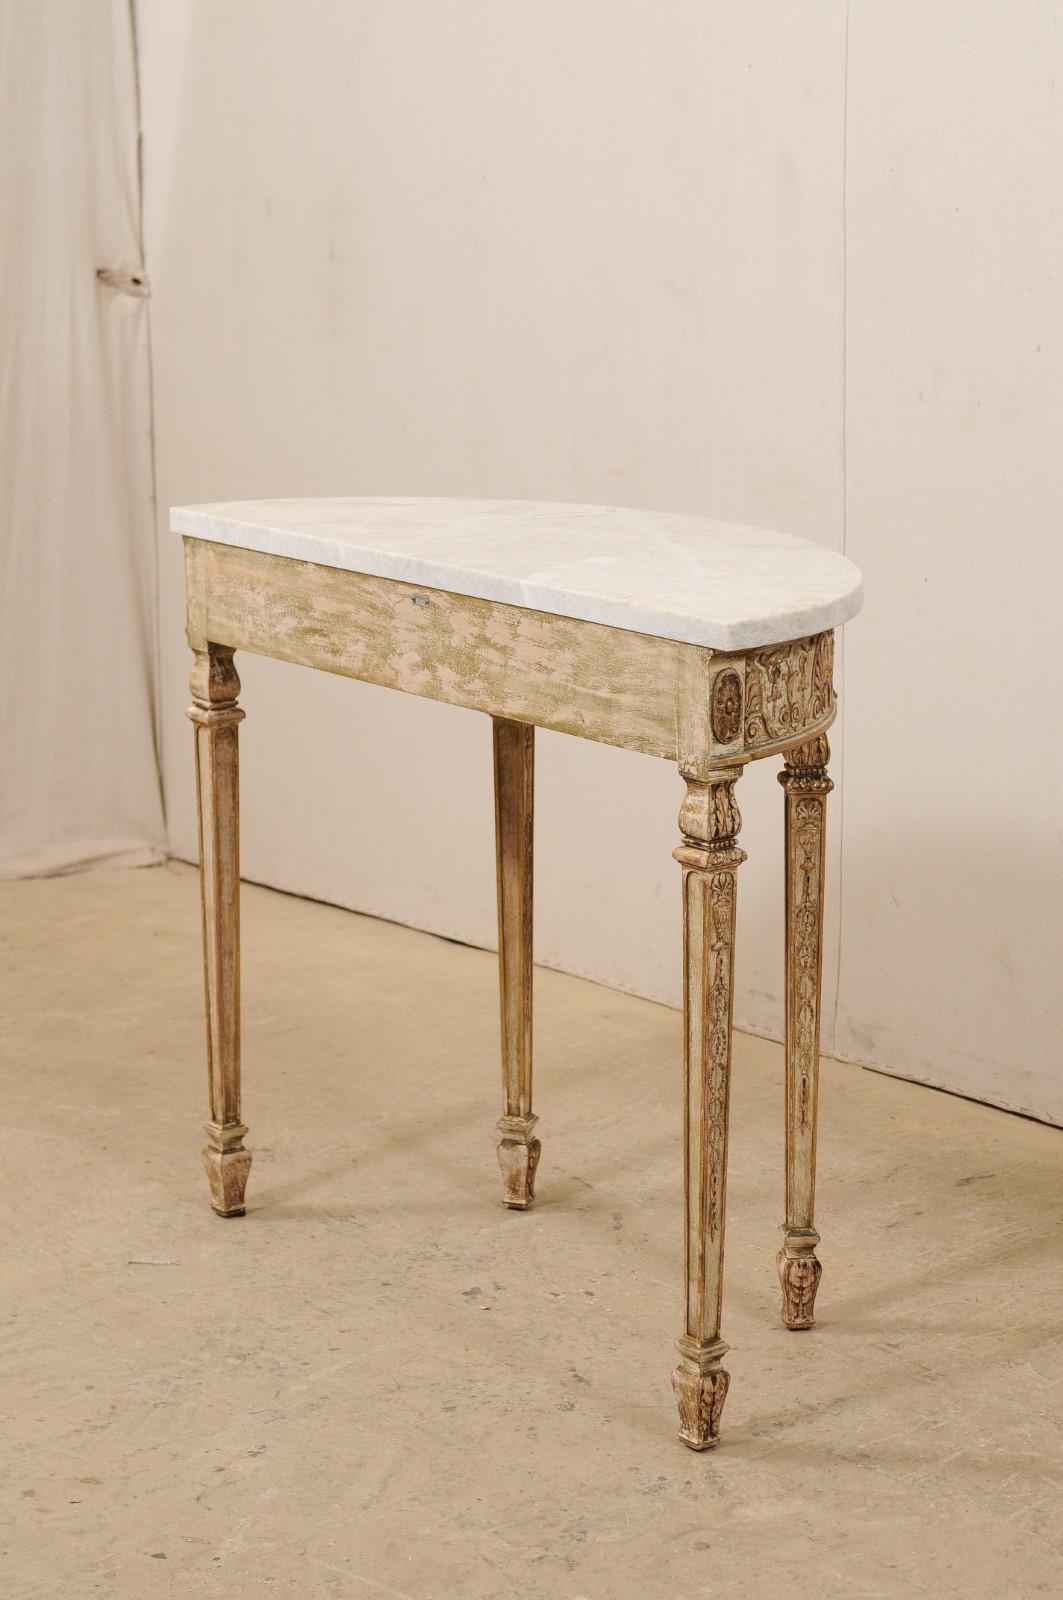 20th Century Antique Italian-Style Demilune Table with Nicely Carved Accents & New Marble Top